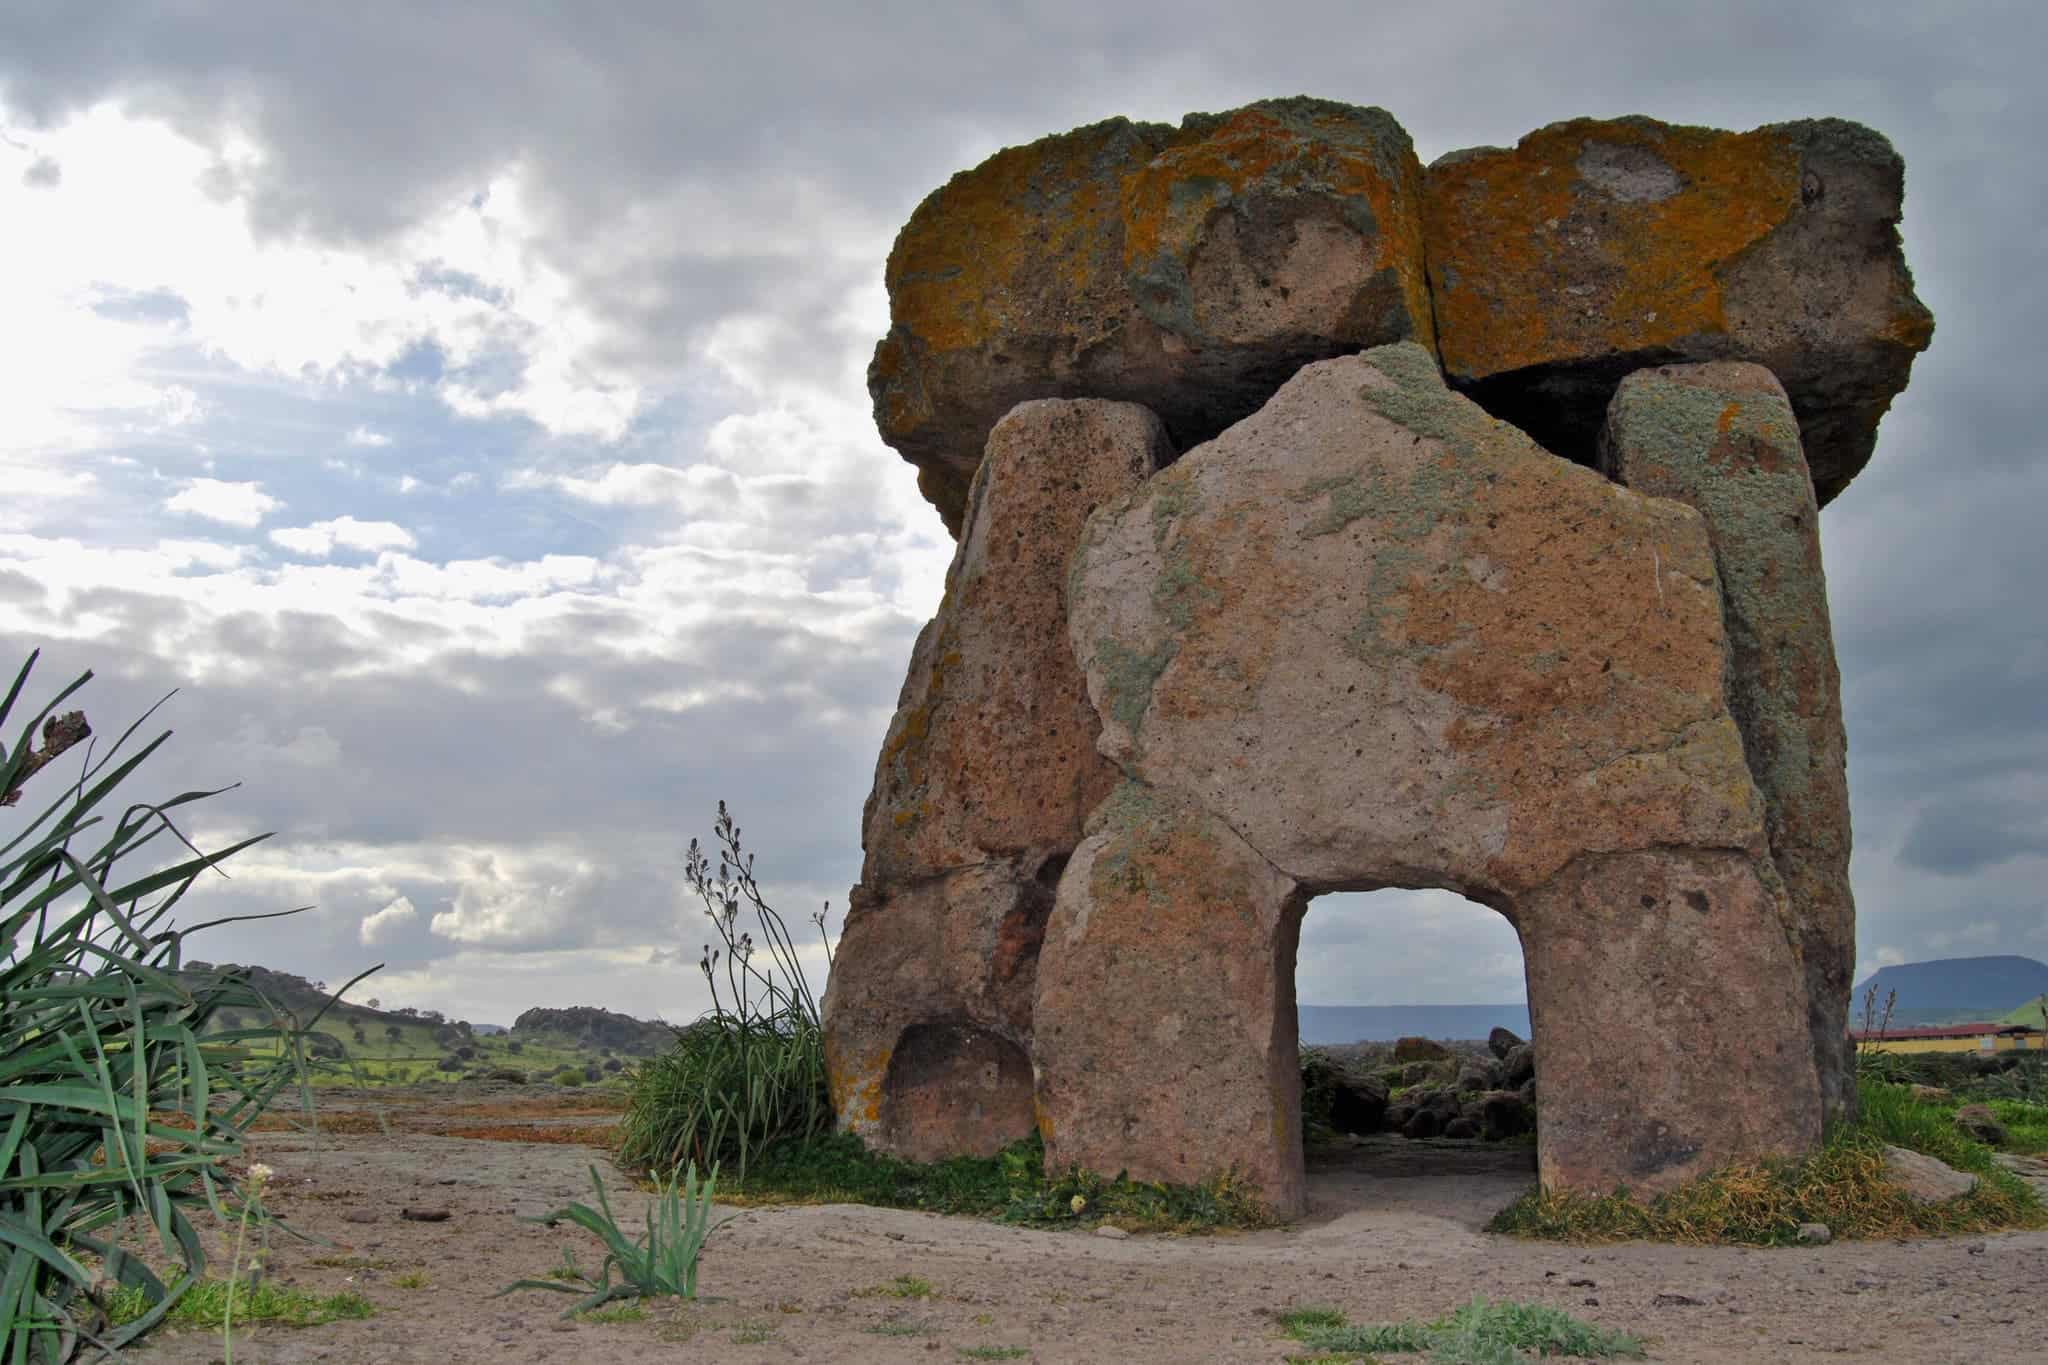 Ancient monoliths like Stonehenge may have spread from northwestern France  about 7,000 years ago